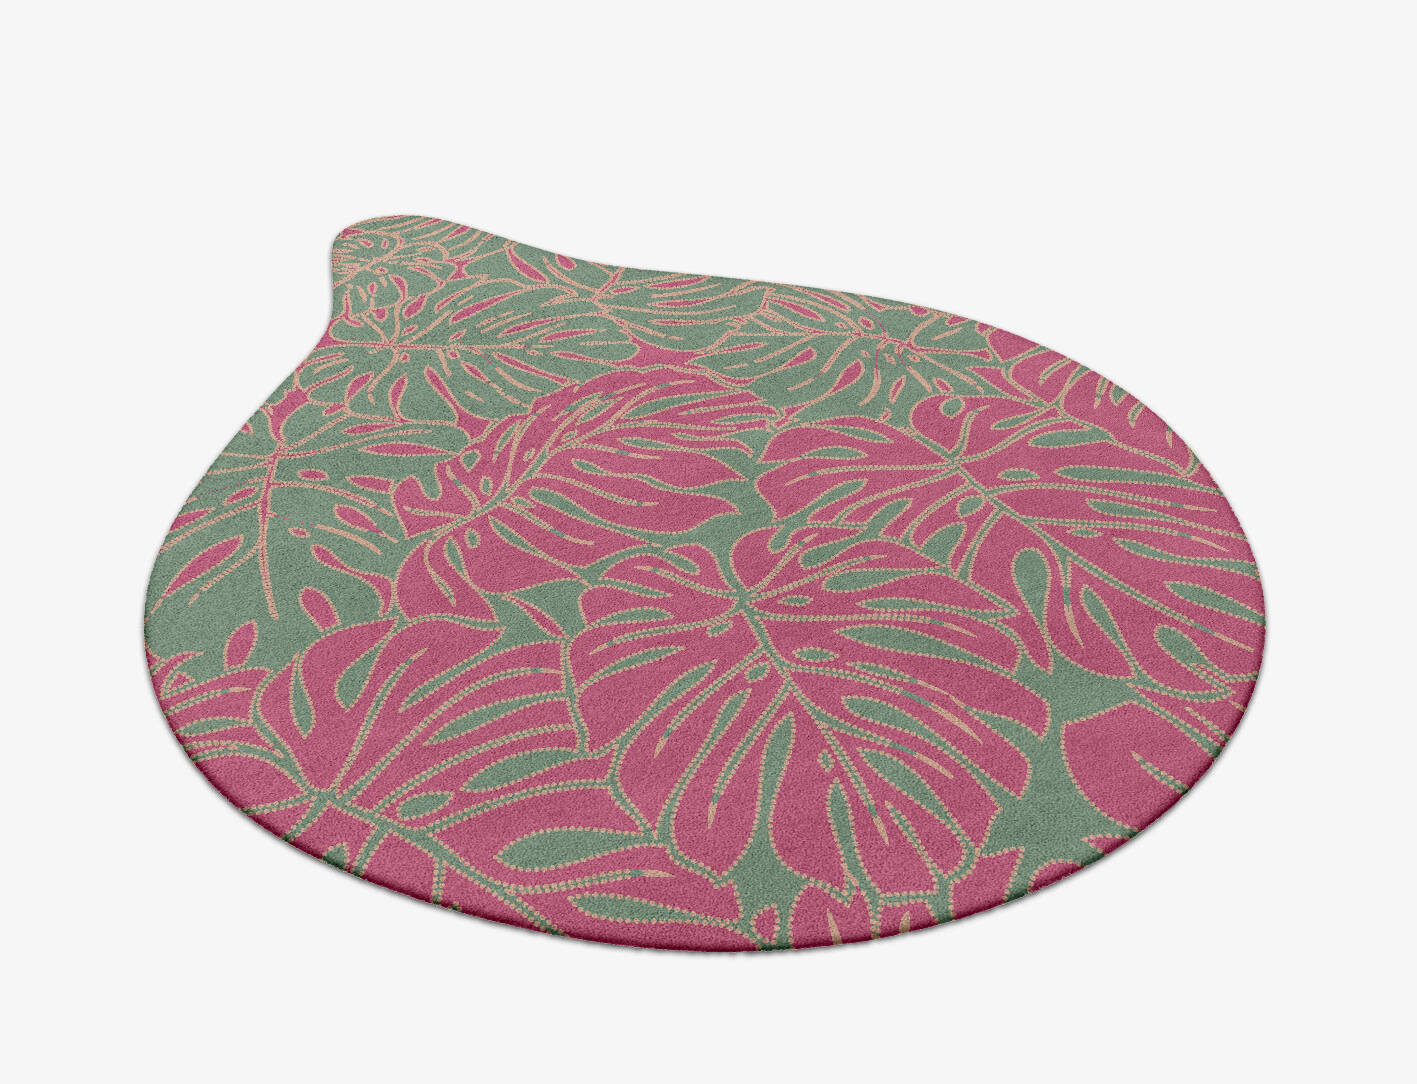 Foliage Floral Drop Hand Tufted Pure Wool Custom Rug by Rug Artisan